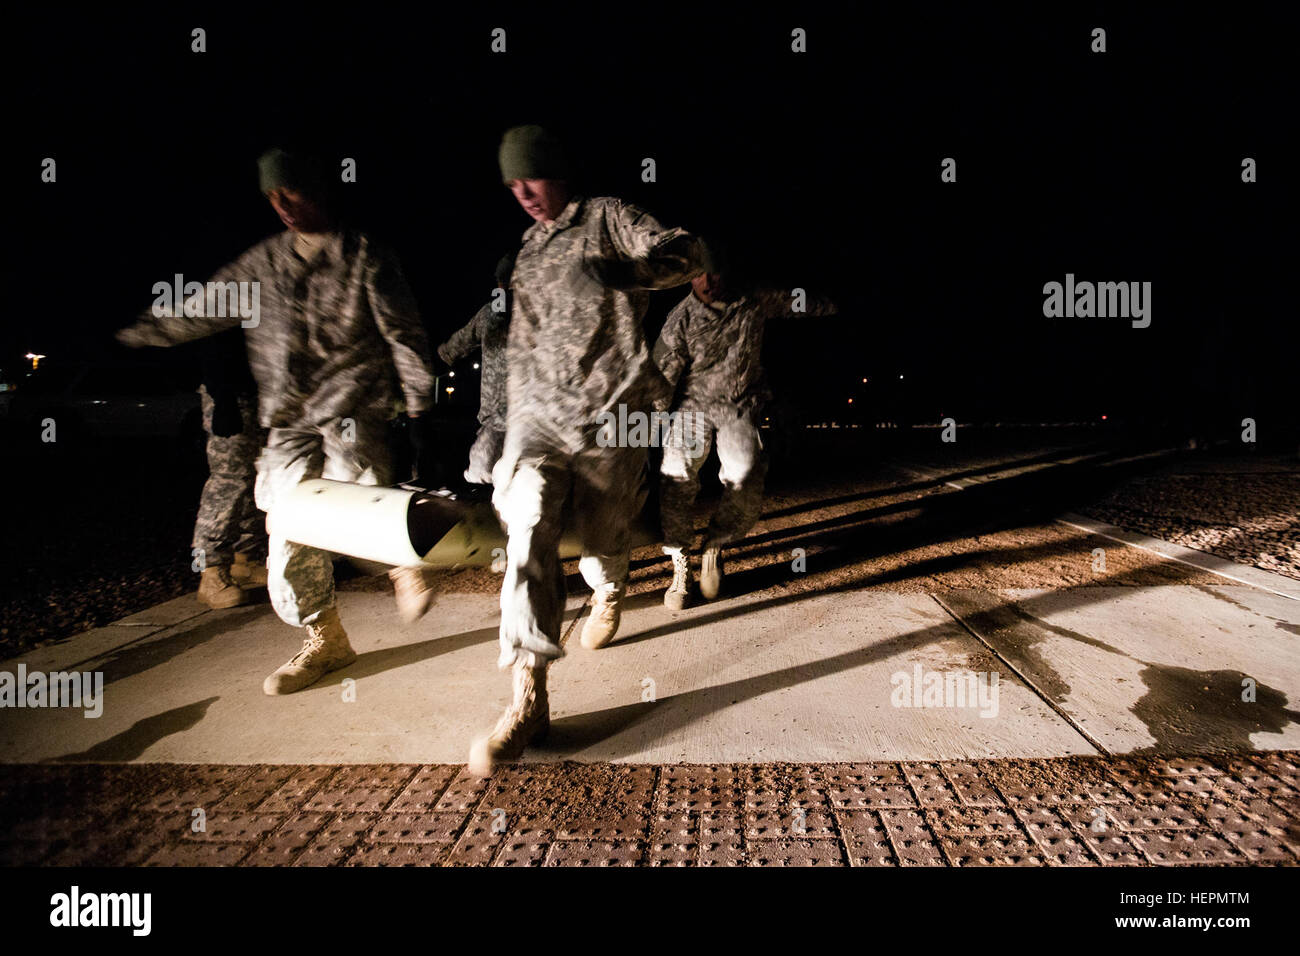 Students of Desert Warrior school, Iron Training Detachment, 1st Armored Division carry a sled as they perform a physical fitness assessment at Fort Bliss, Texas, Jan. 12, 2016. Desert Warrior, the newest squad-based leadership class in the Army, teaches soldiers how to survive and fight in a desert environment. The 17-day class is the first desert-specific Army school since the desert phase of Ranger School was discontinued in 1995. (U.S. Army photo by Staff Sgt. Marcus Fichtl) Desert Warrior fitness assessment 160112-A-TW035-007 Stock Photo